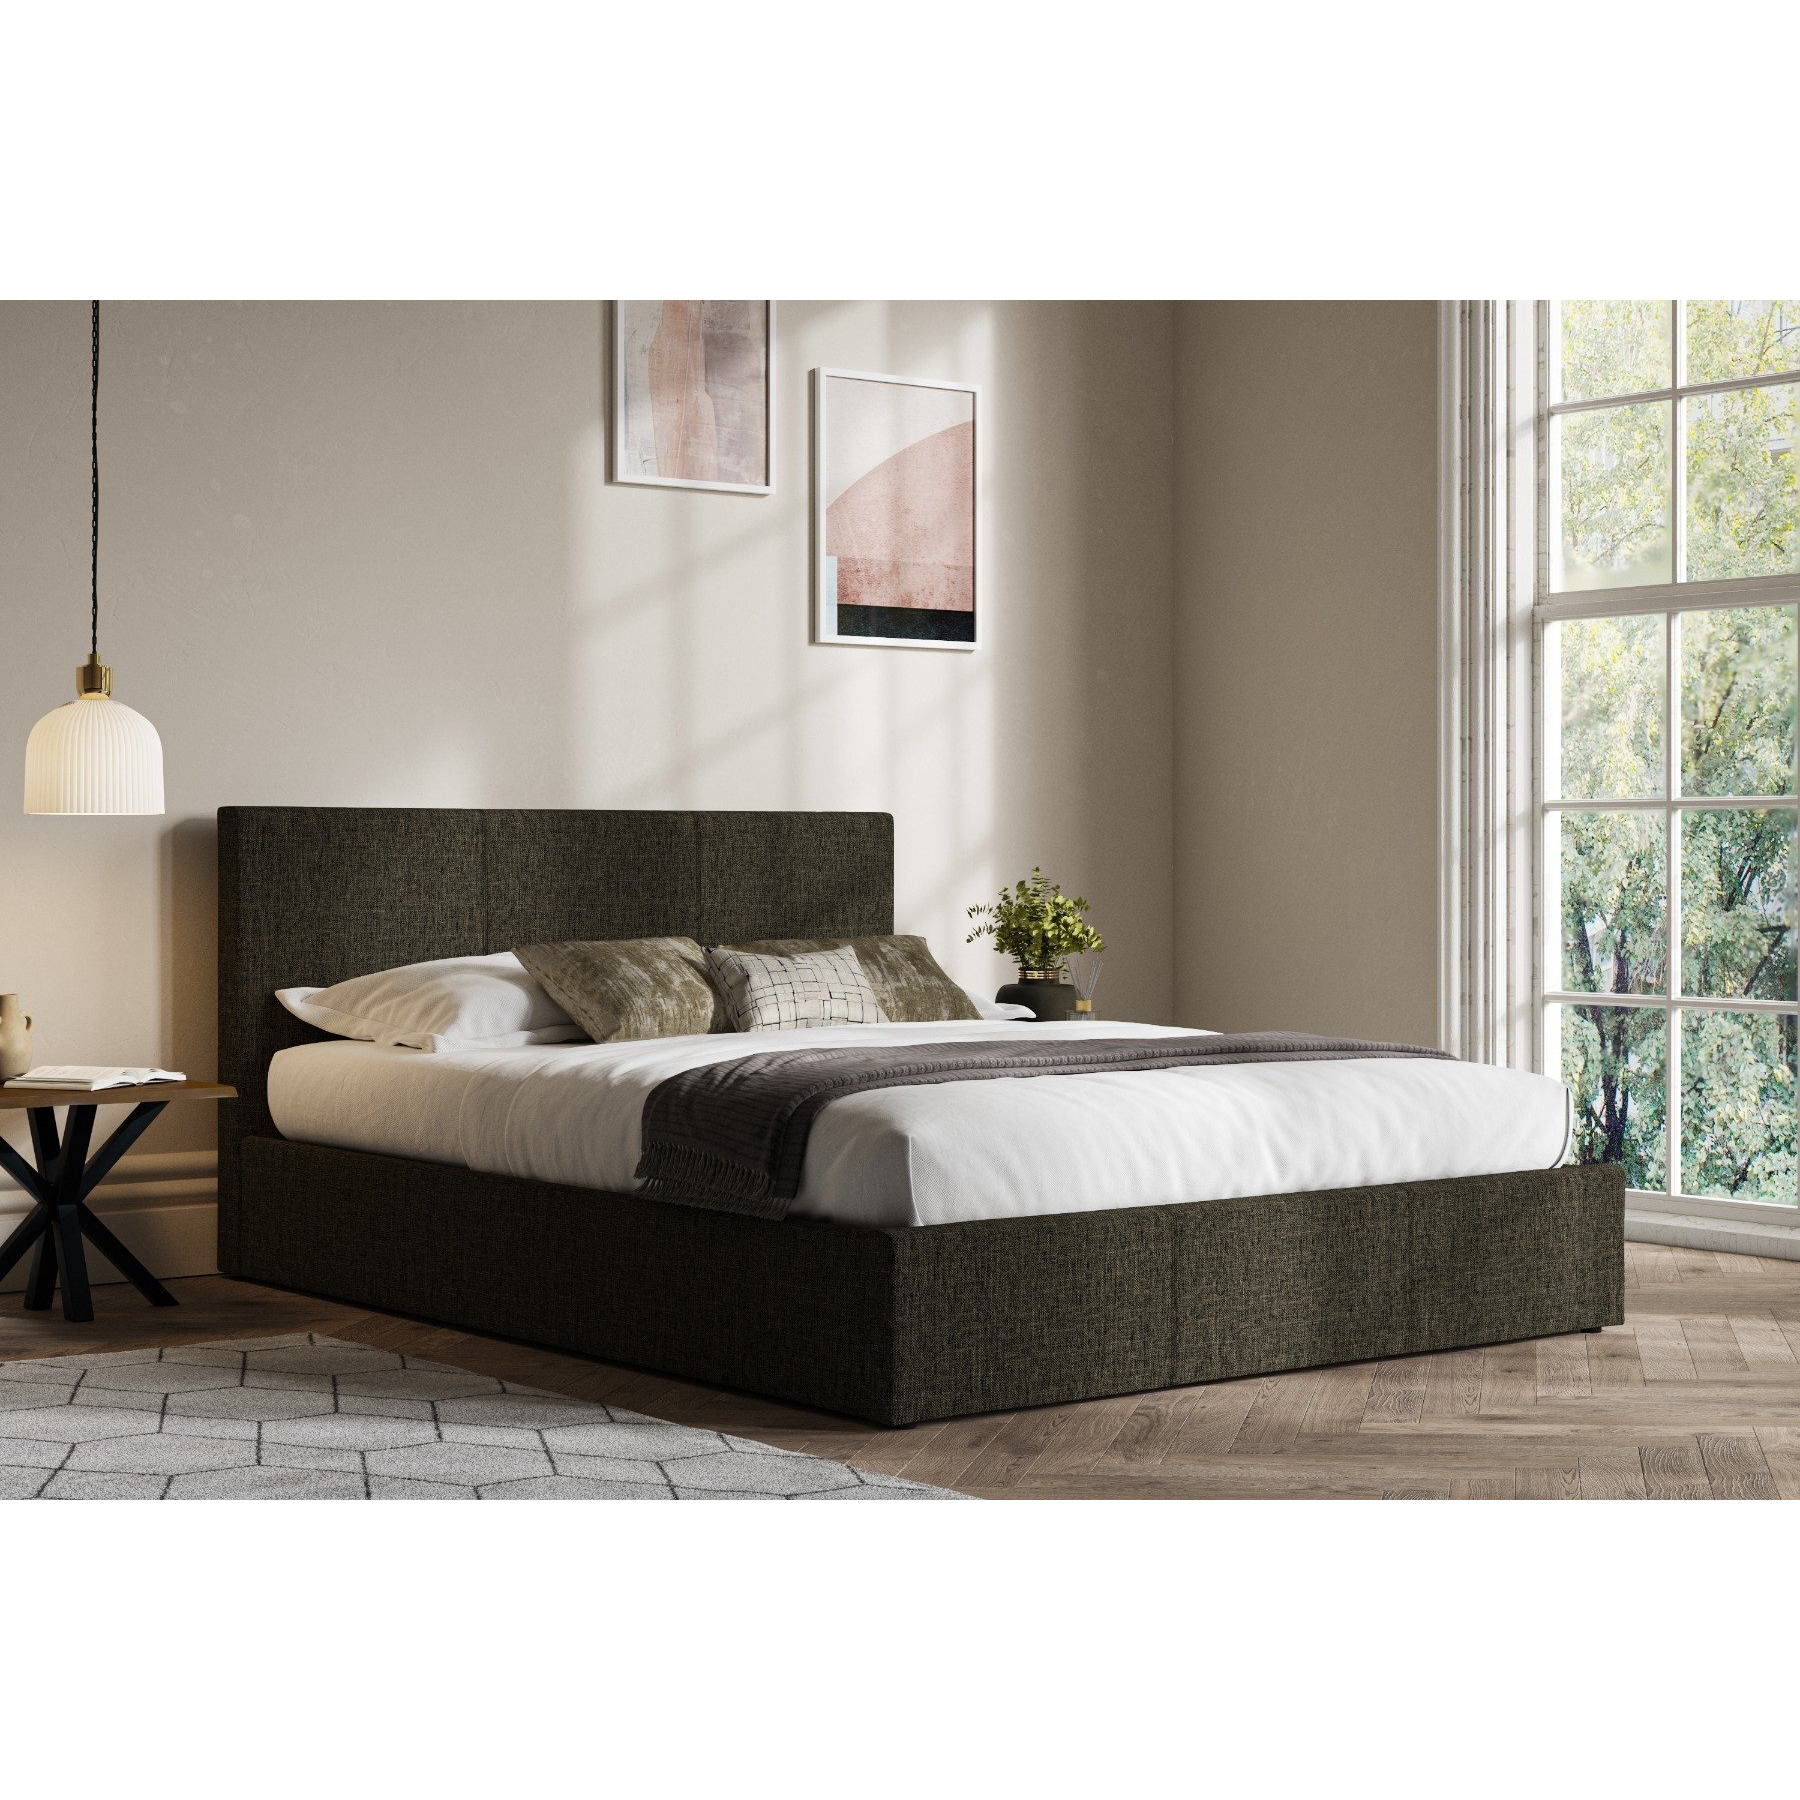 Emporia Beds Stirling Charcoal Fabric Ottoman Bed Frame Kingsize - image 1